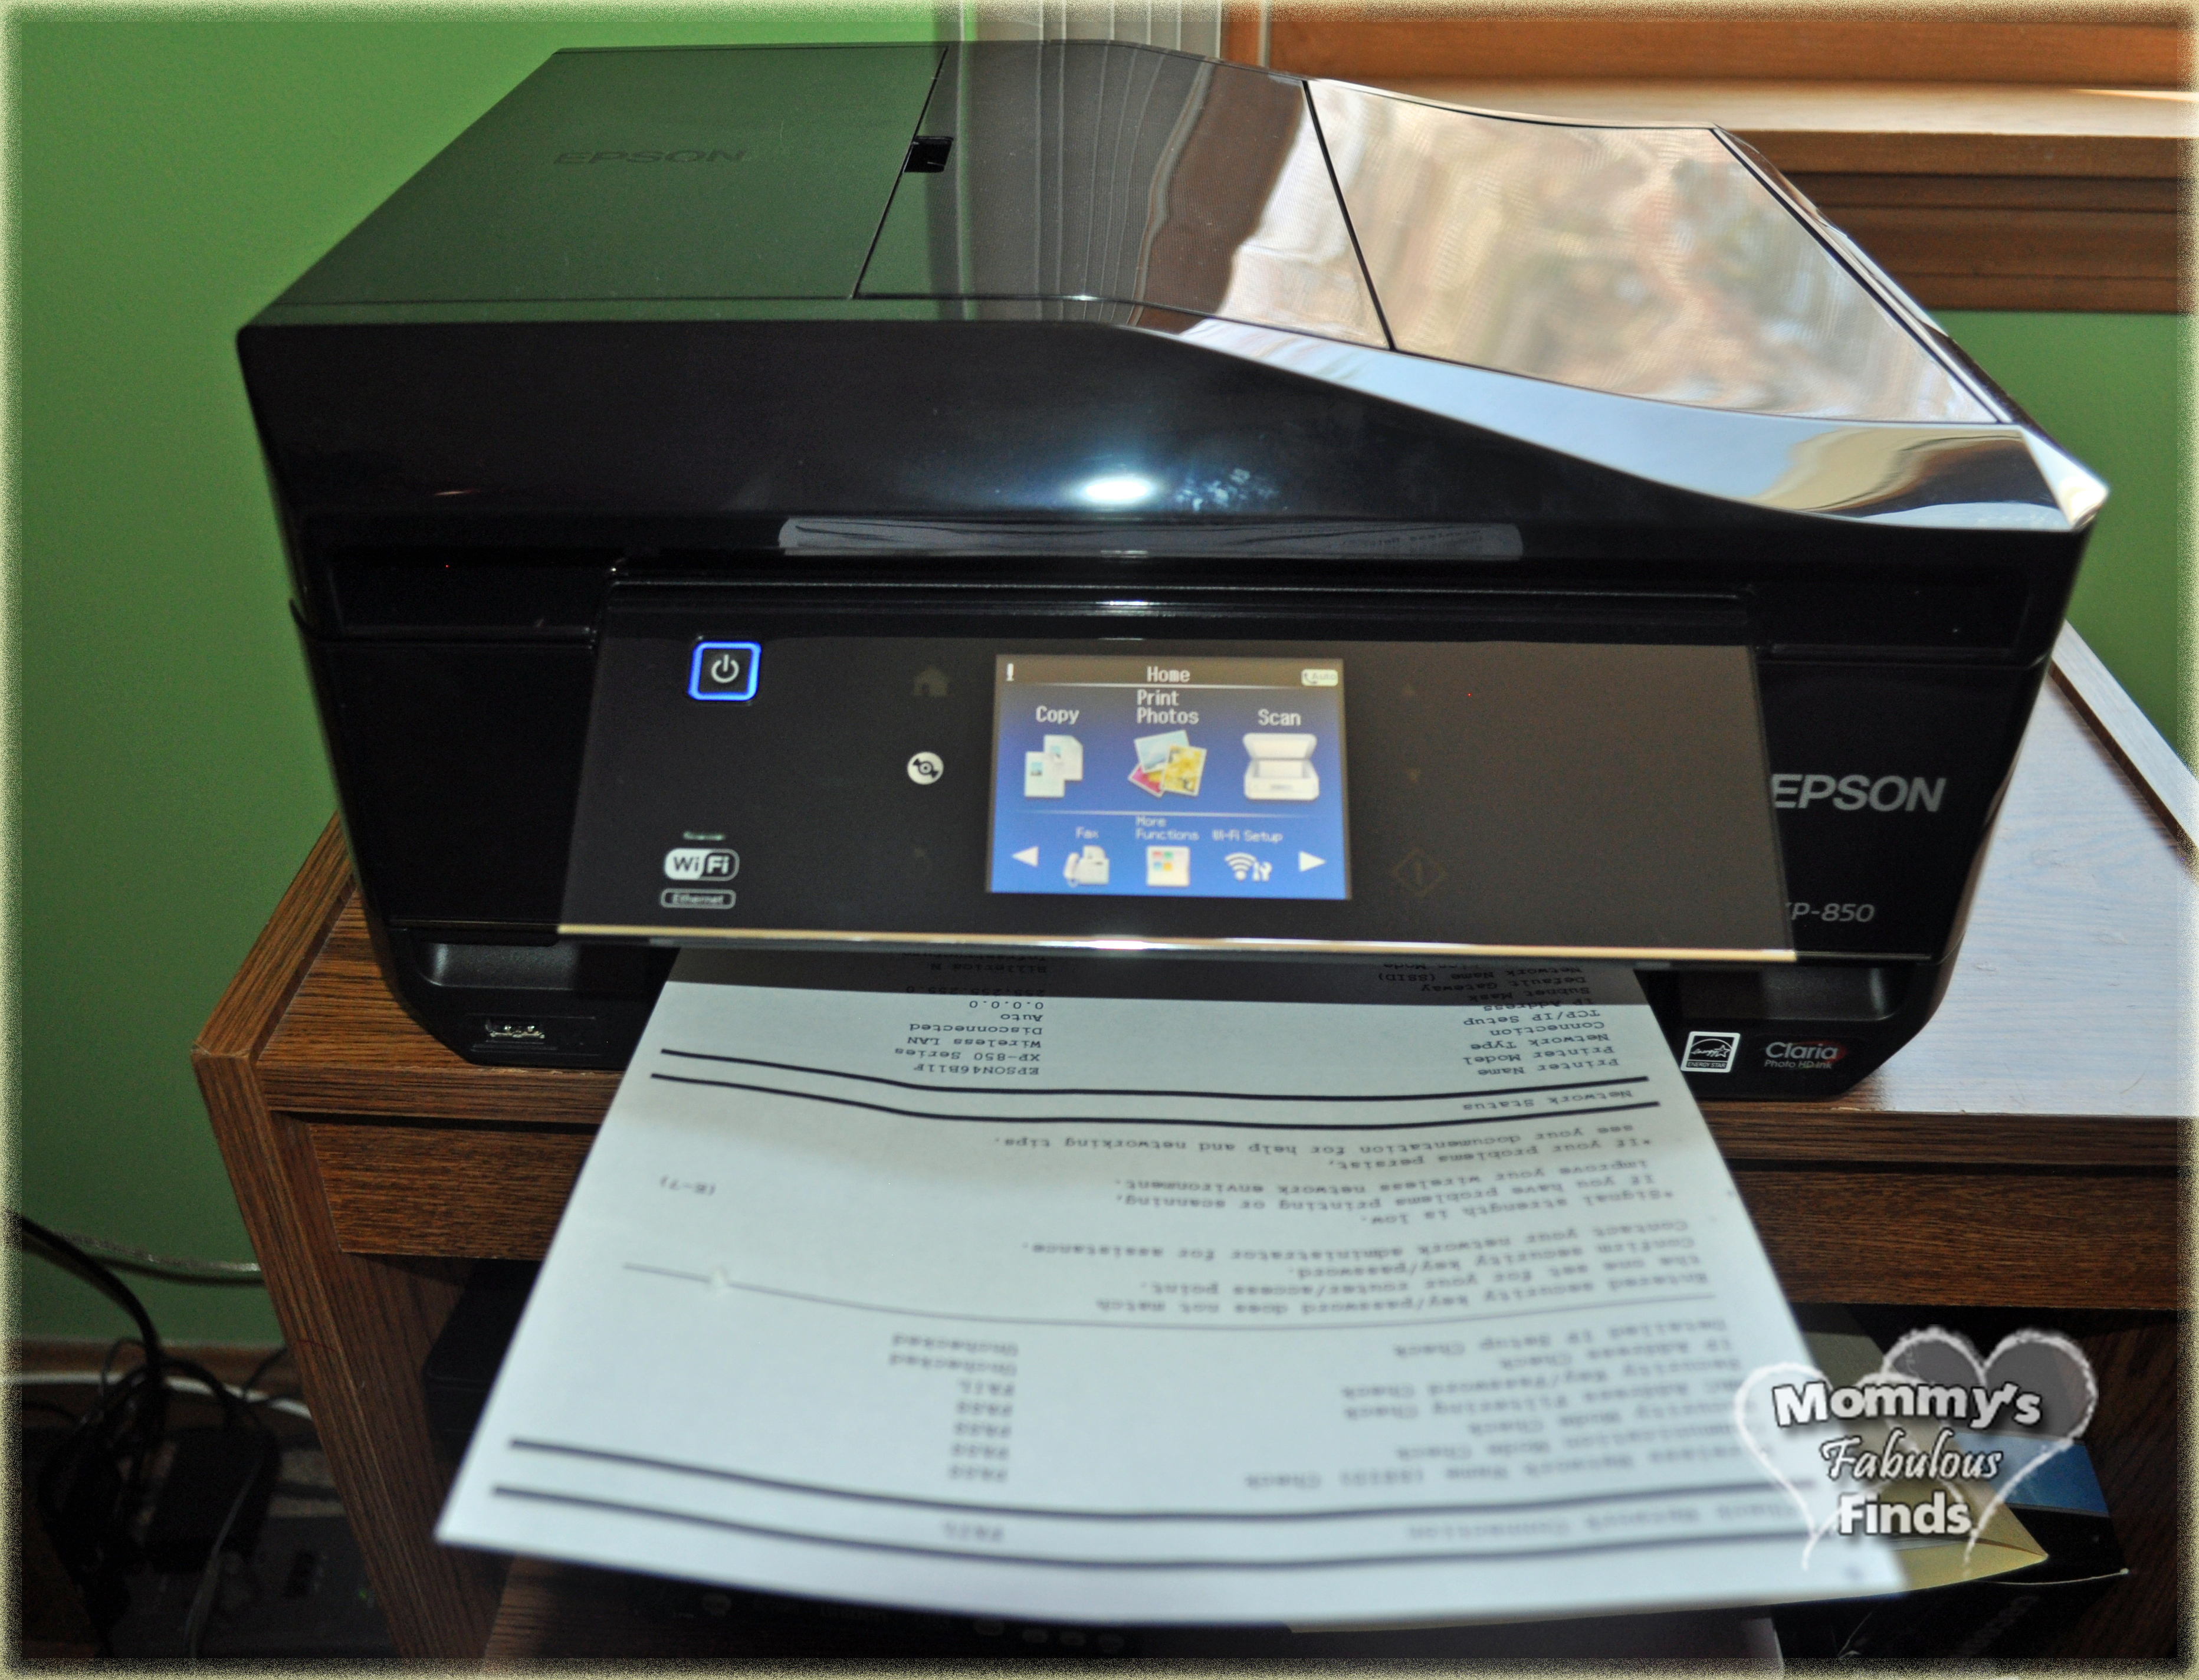 Pioner let at håndtere nyheder Epson Expression Photo XP-850 Small-in-One Printer Review - Mommy's  Fabulous Finds